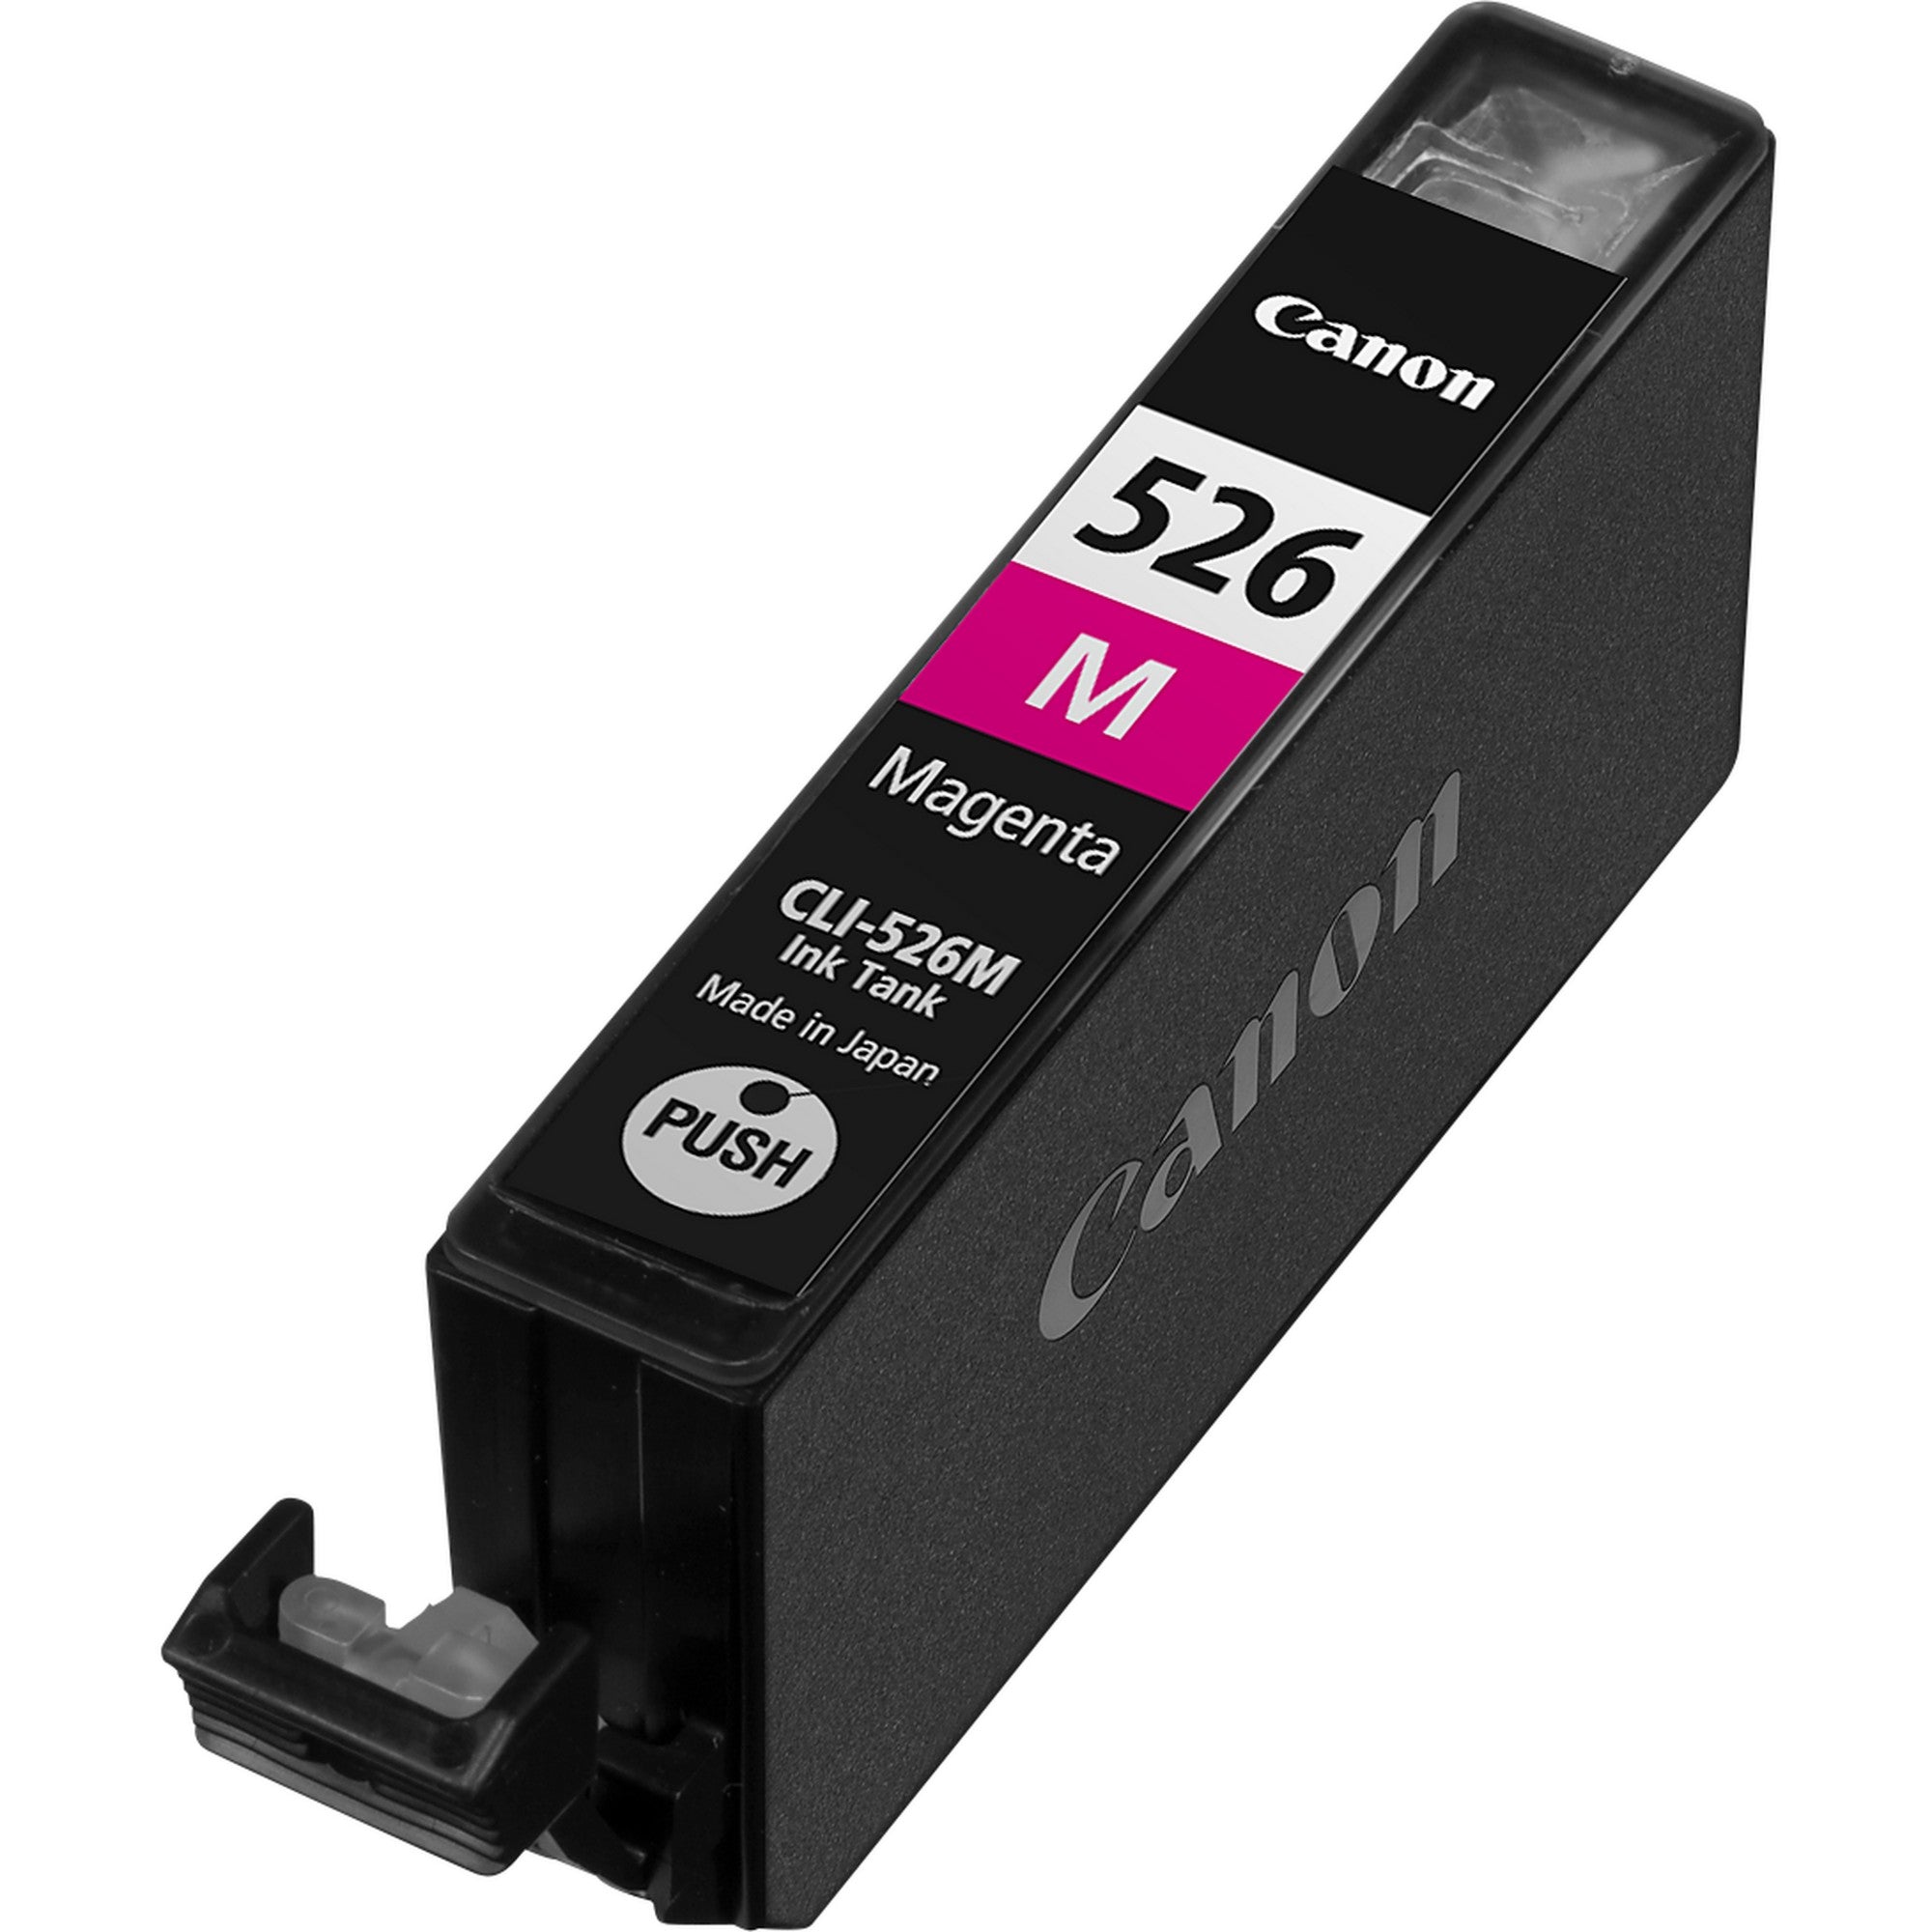 Canon 4542B001/CLI-526M Ink cartridge magenta, 520 pages ISO/IEC 24711 9ml for Canon Pixma IP 4850/MG 5350/MG 6150/MG 6250/MX 885